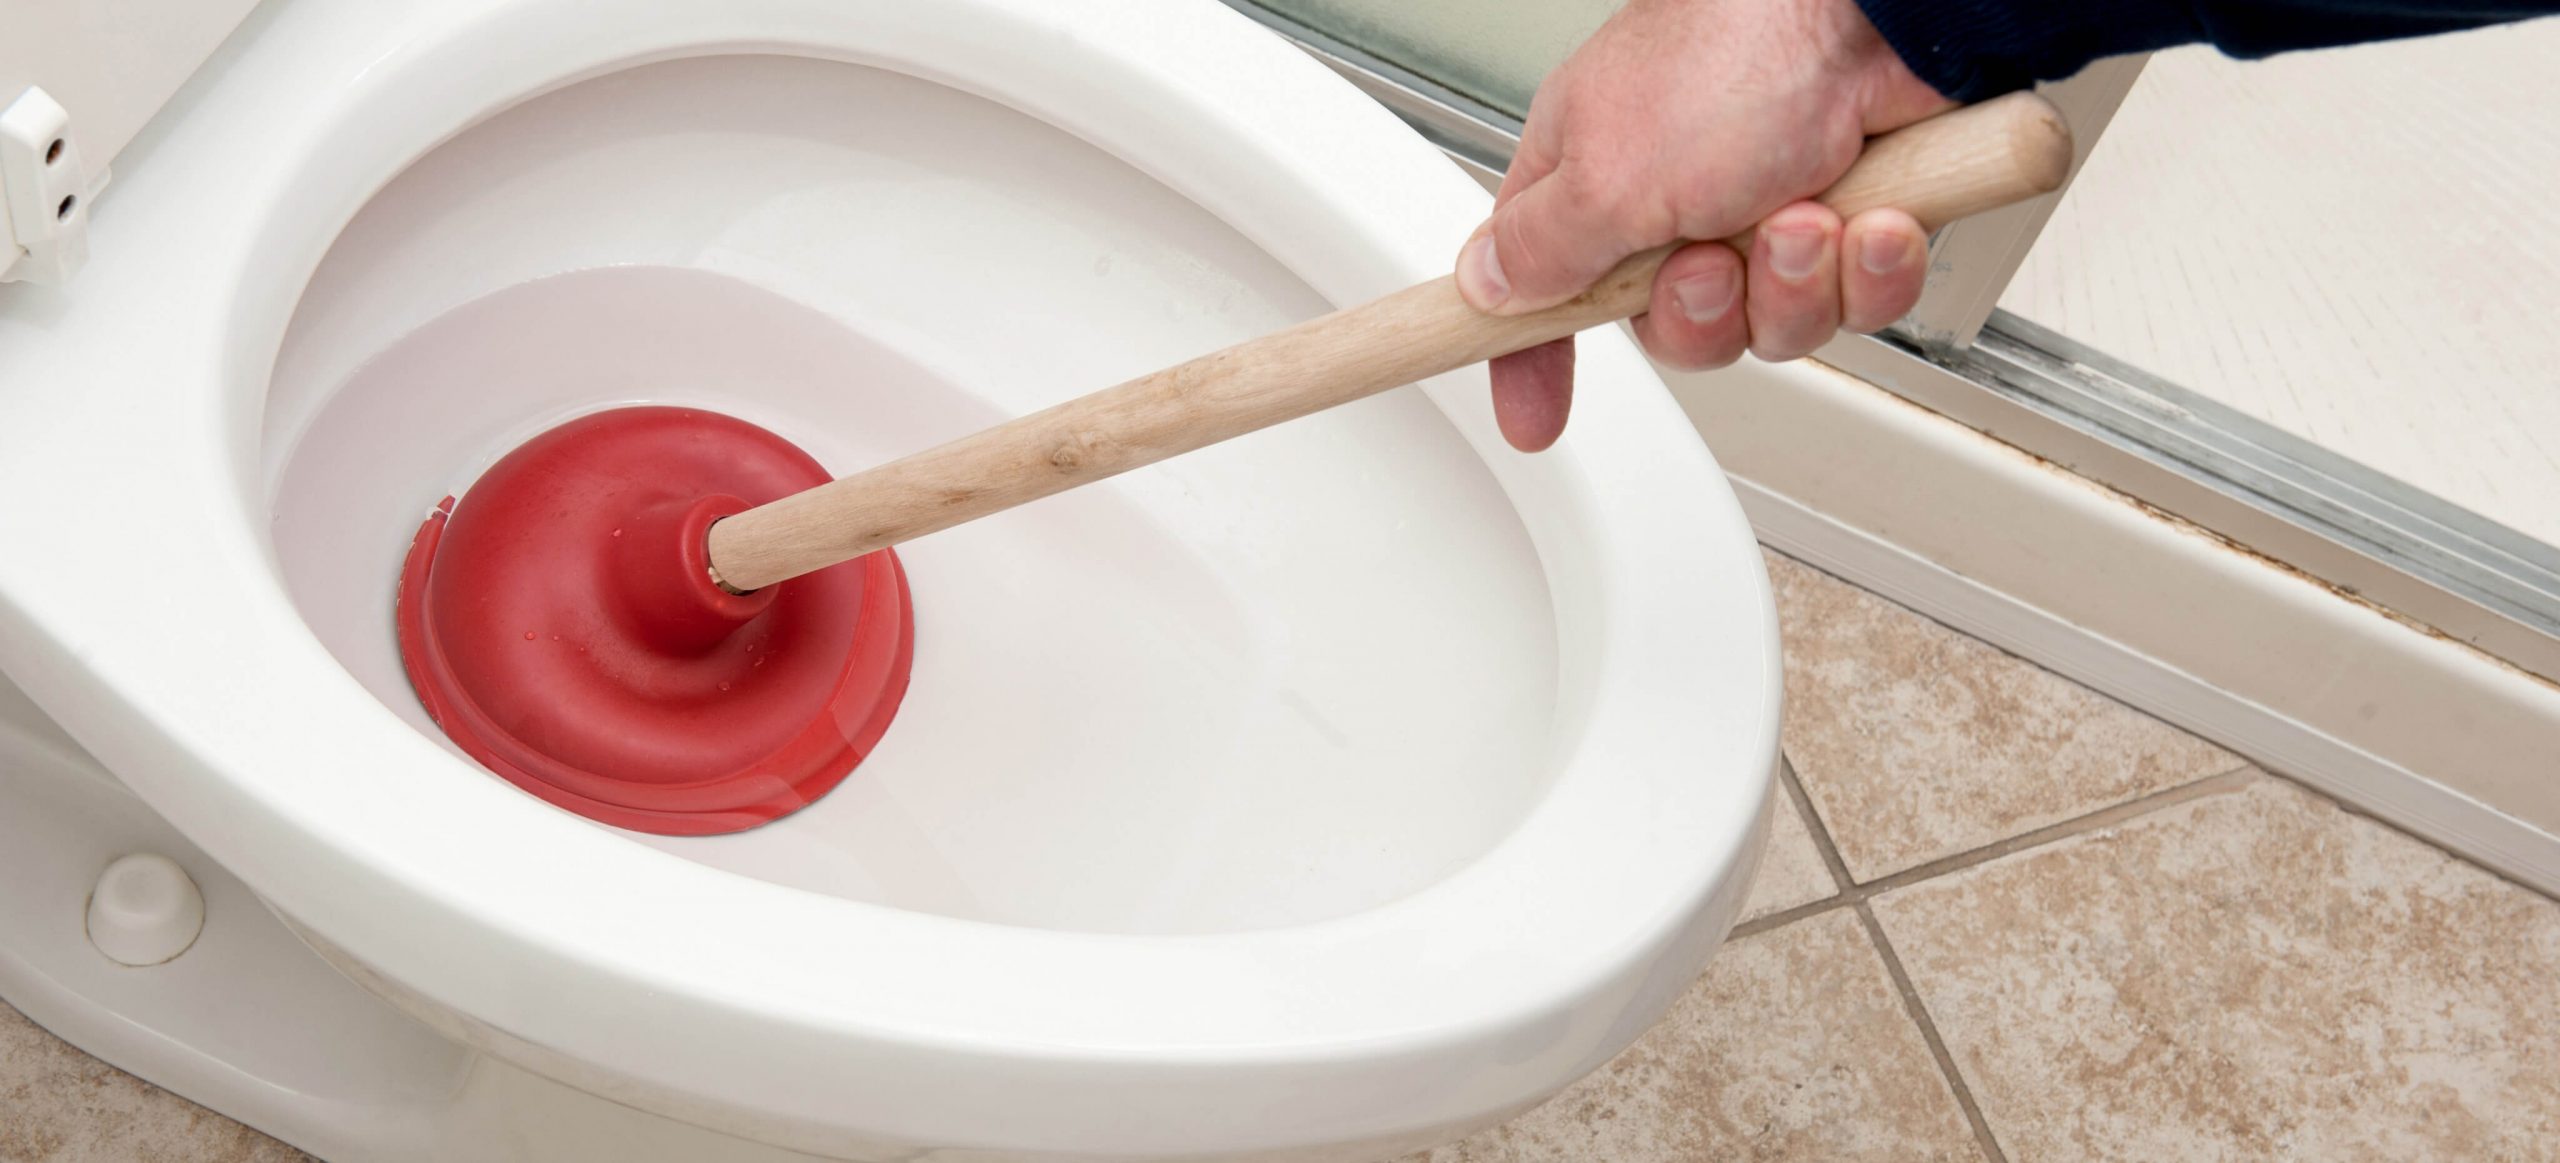 Man plunging a blocked toilet